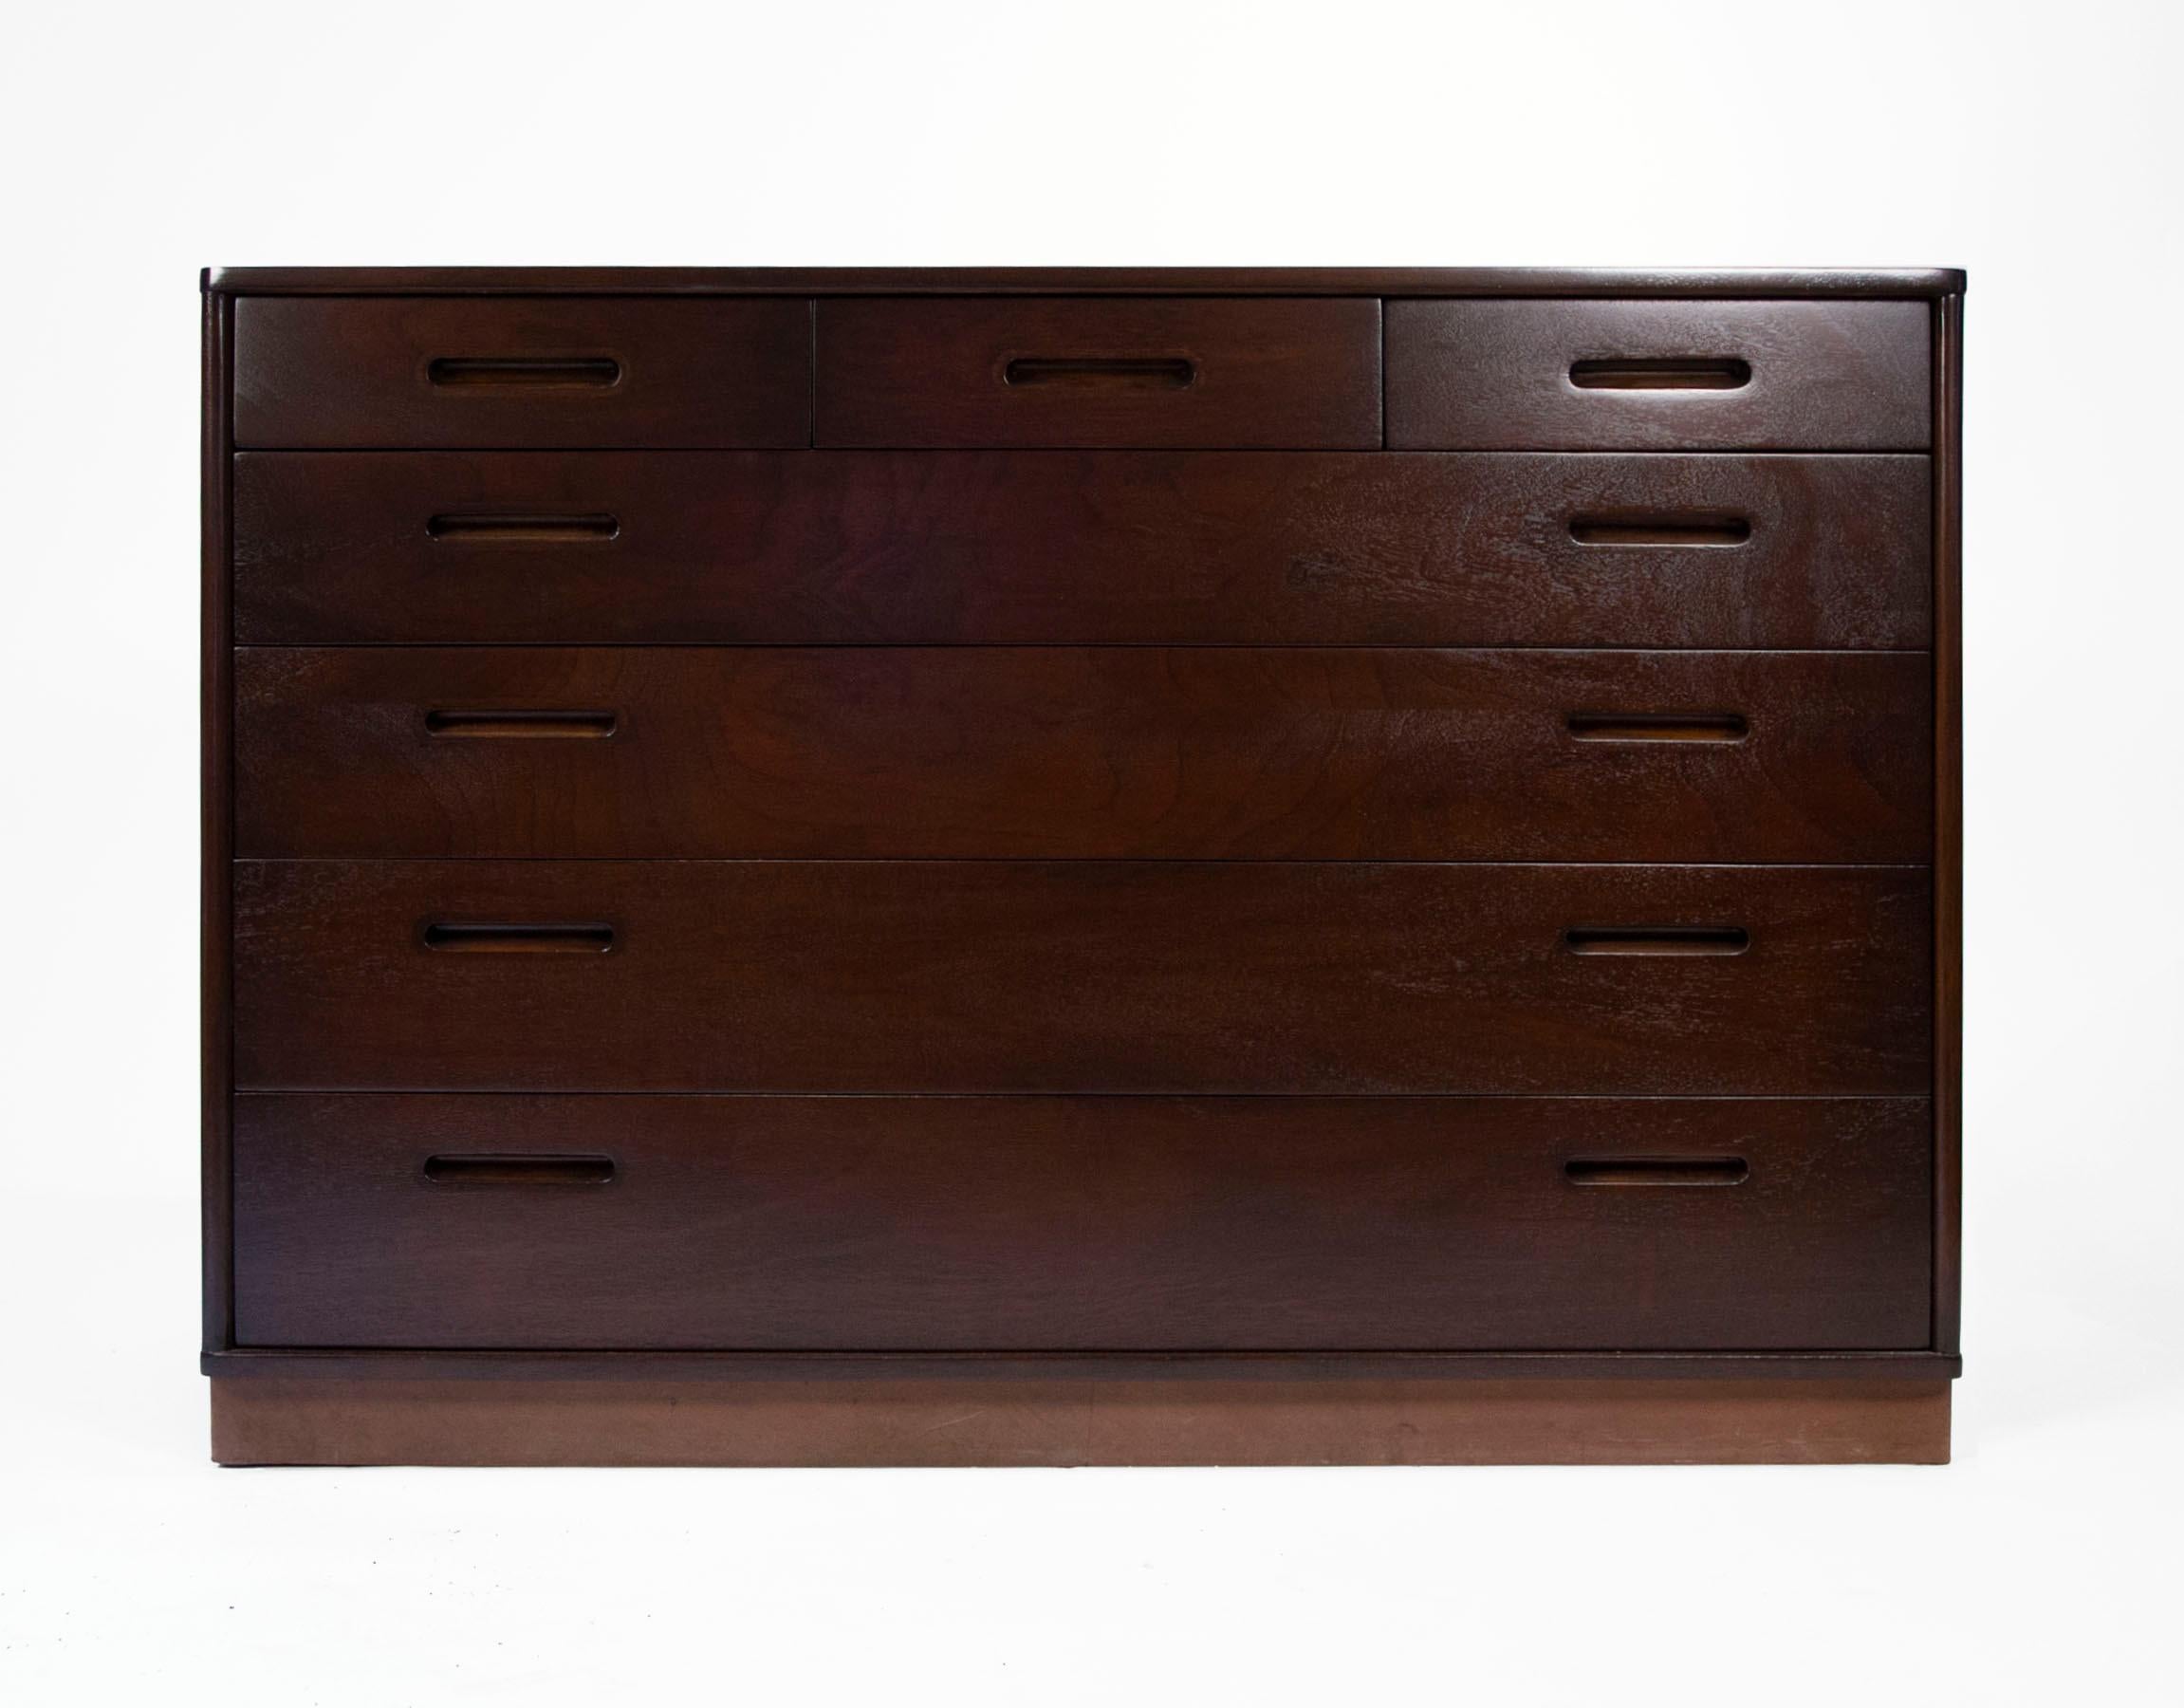 Pair of six drawer bachelor chests with inset hardware designed by Edward Wormley for Dunbar in a dark espresso stain with a clear satin lacquer finish and leather plinth bases. Solid Oak interiors. 

These would serve well as oversized